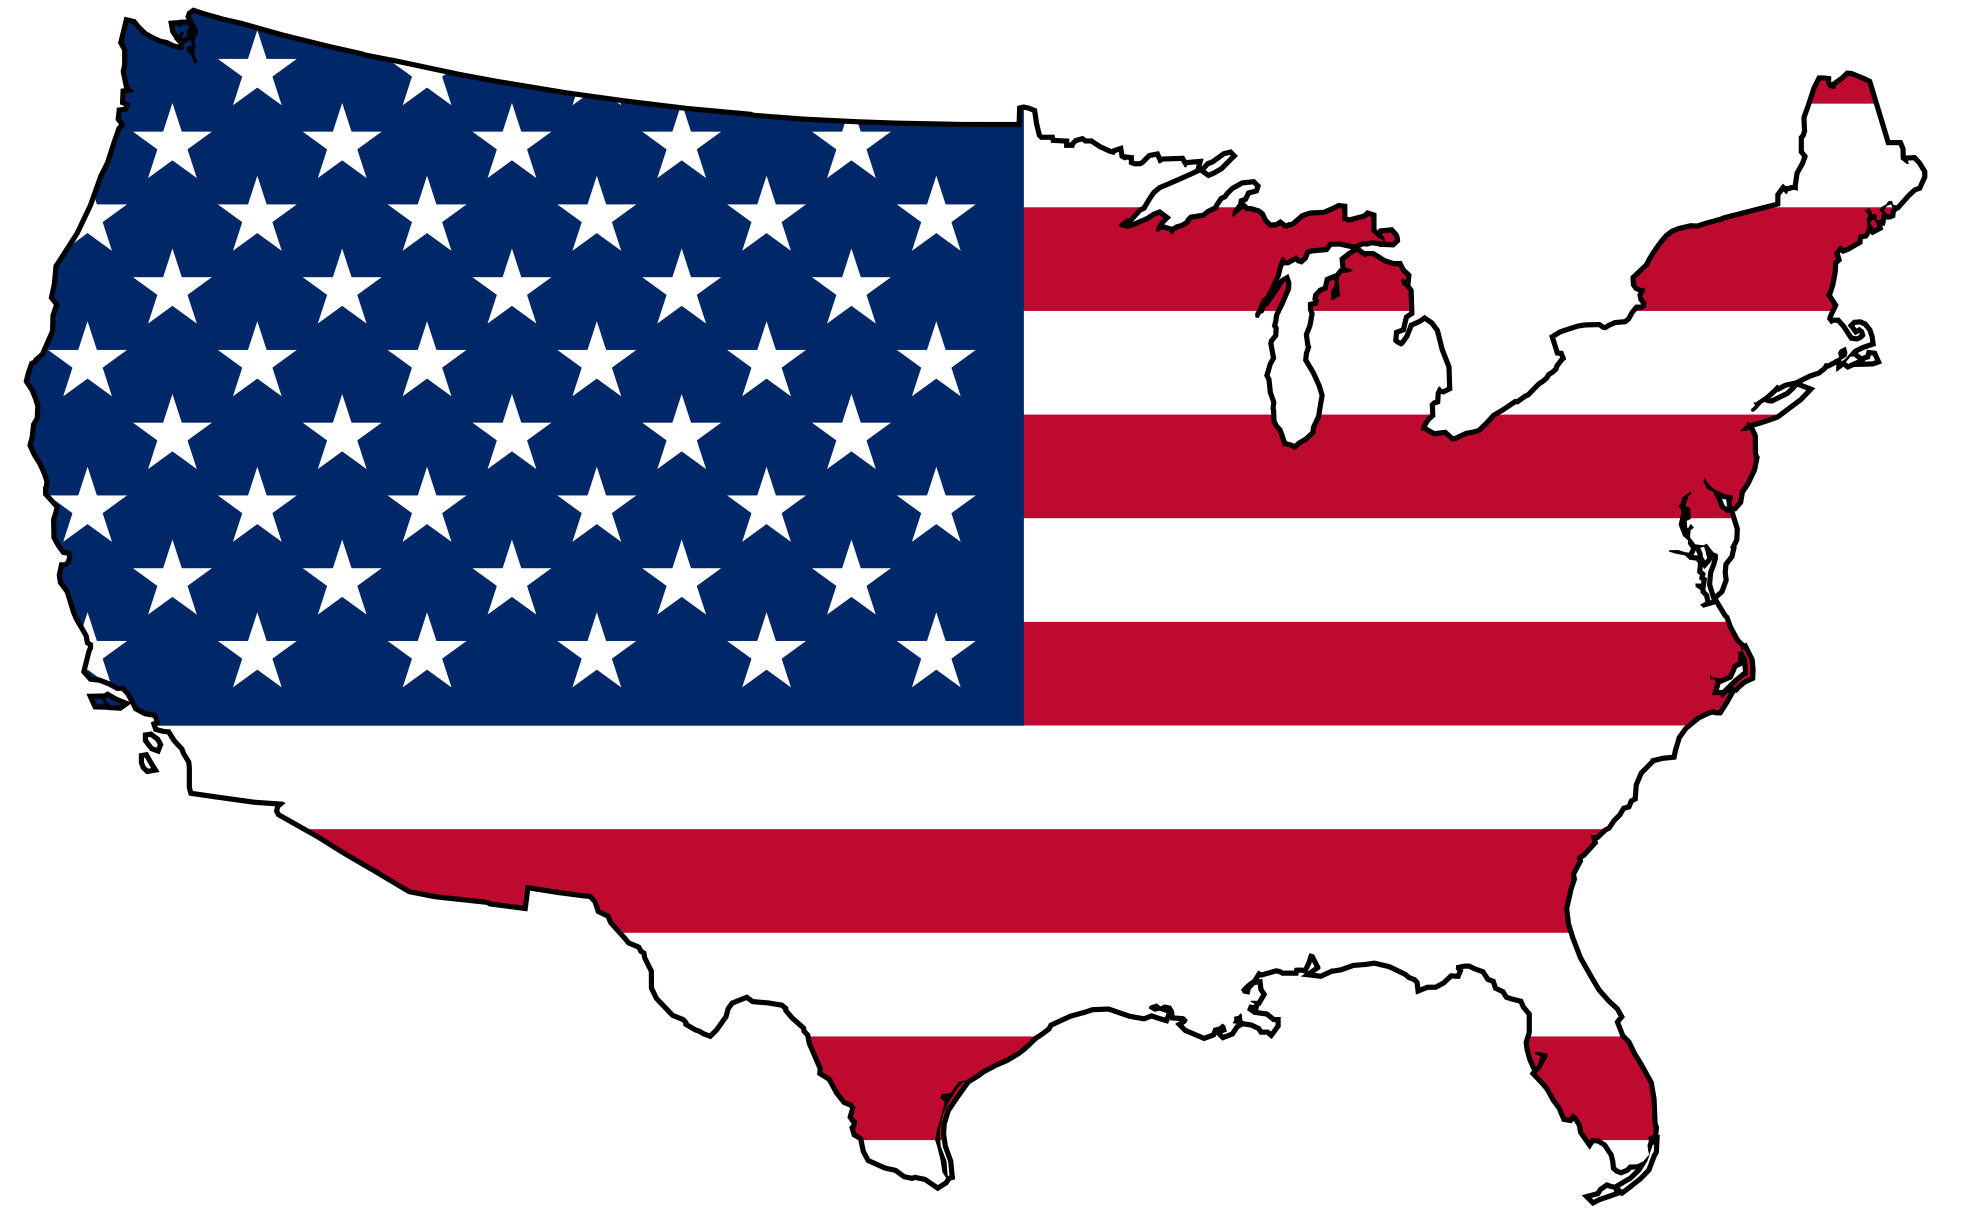 Free USA Cliparts, Download Free Clip Art, Free Clip Art on